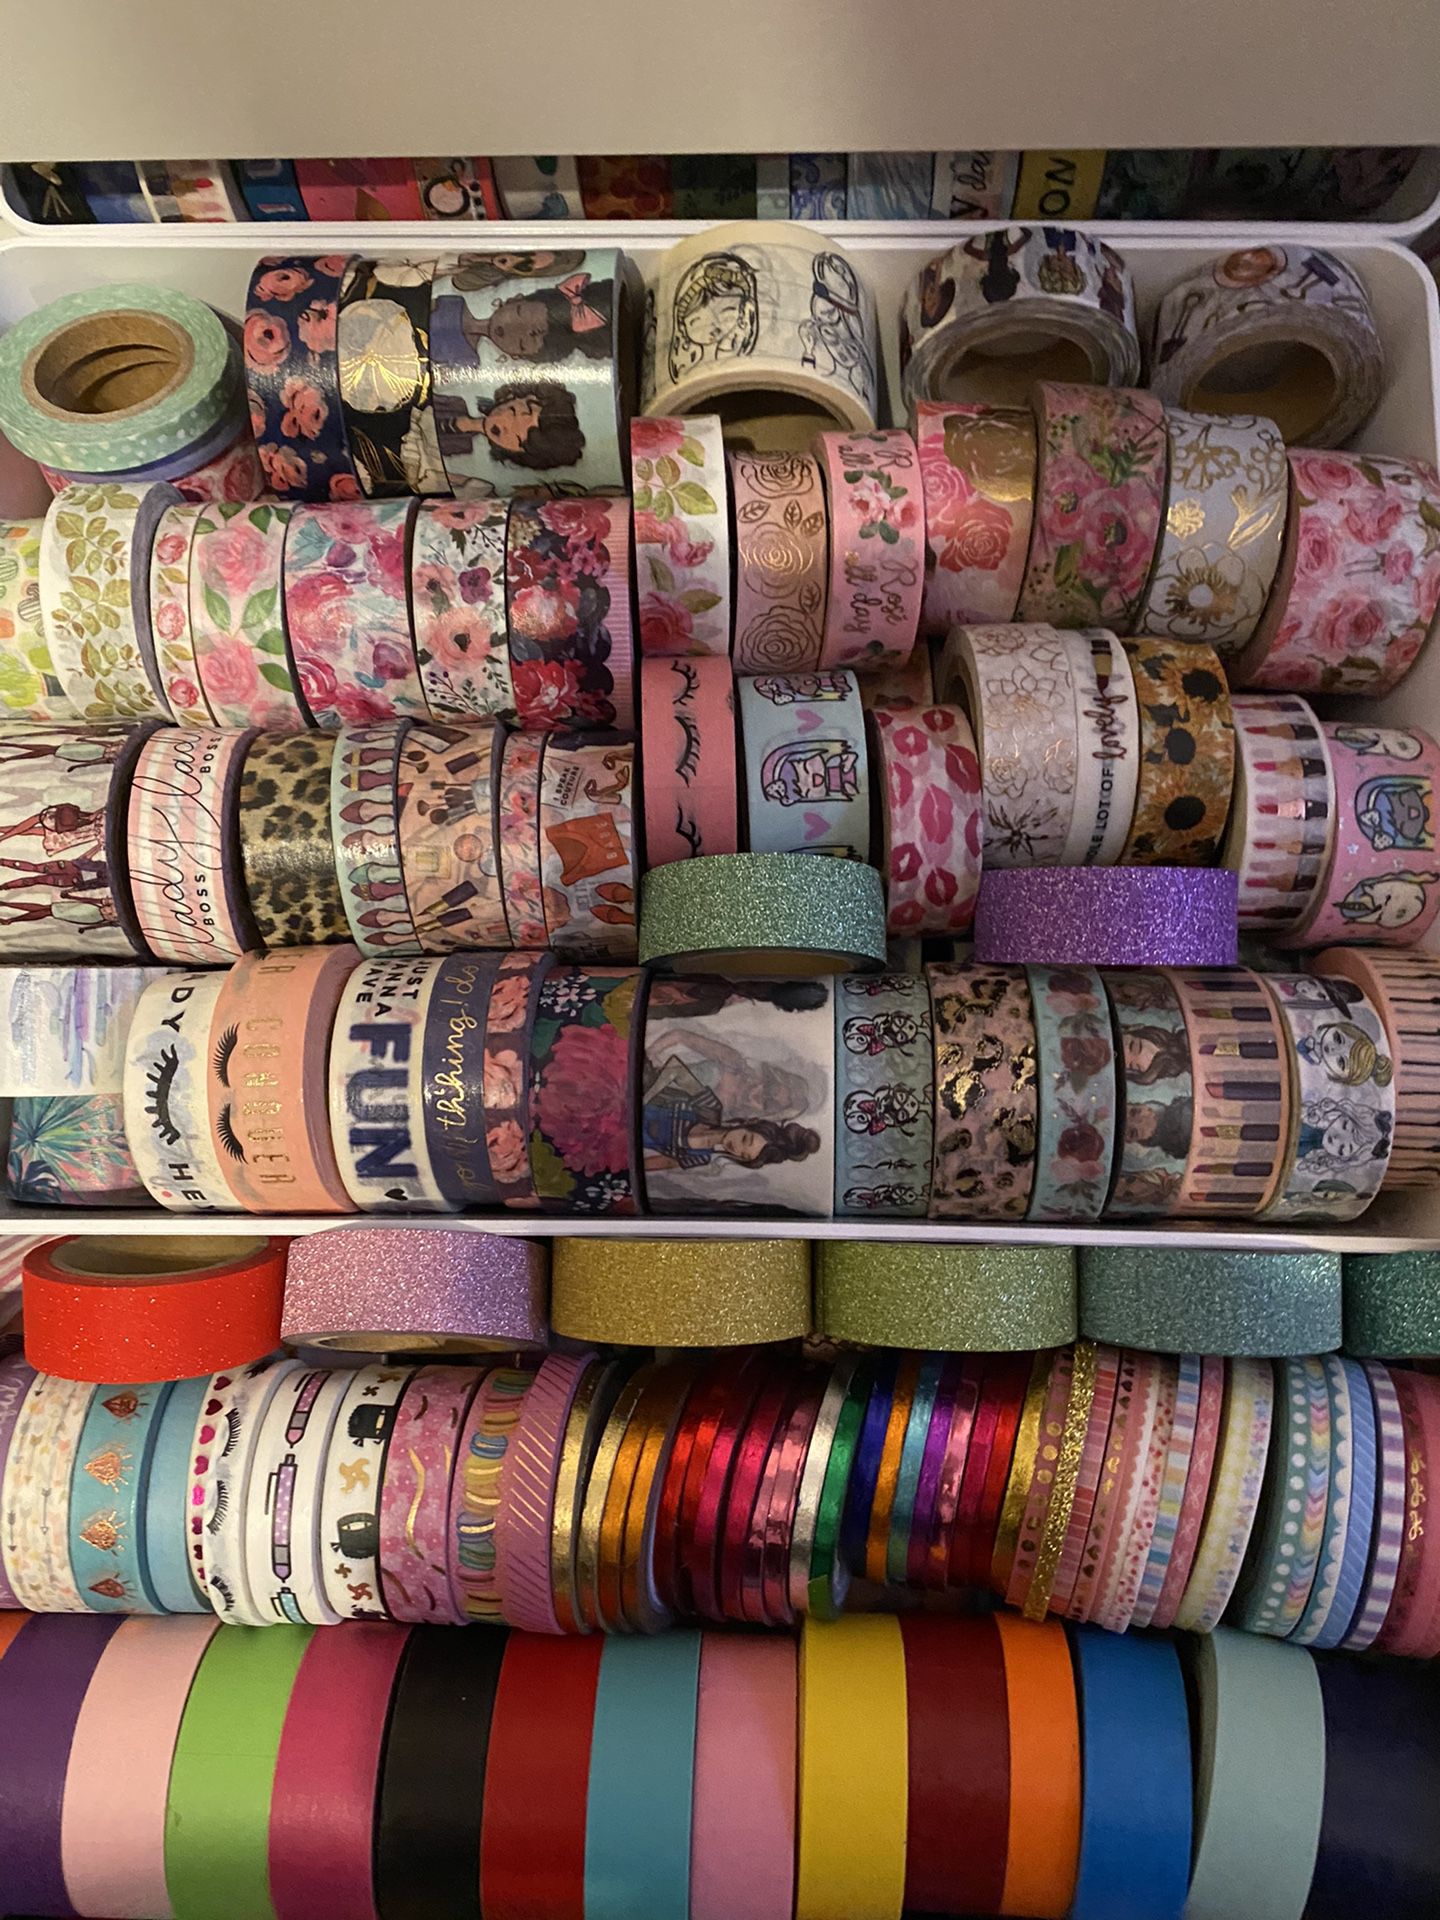 Over 100 Rolls of Washi Tape